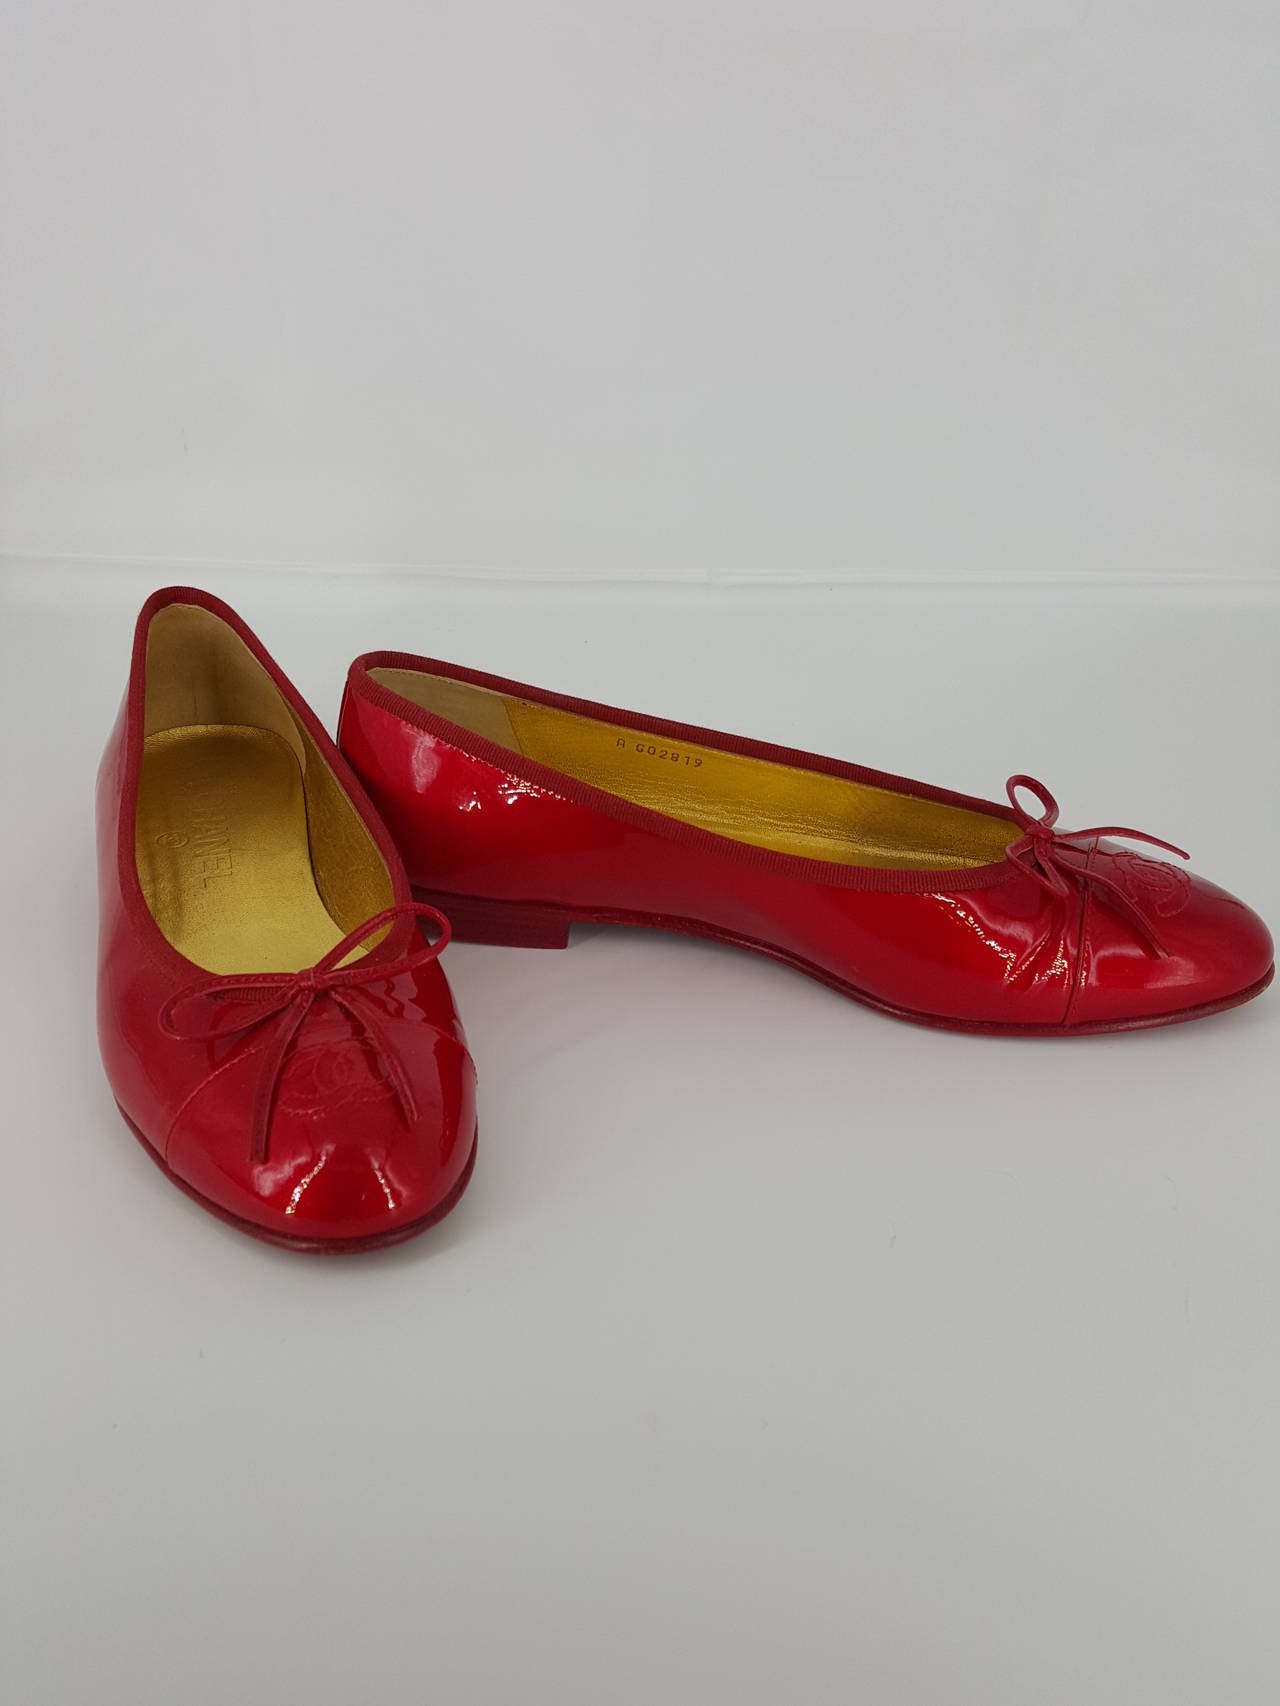 Offer for sale are theses lovely Chanel ballet flats in shiney red patent leather in 39 1/2.  These are in excellent condition and were gently worn once.  They will ship with the original Chanel shoe bag.